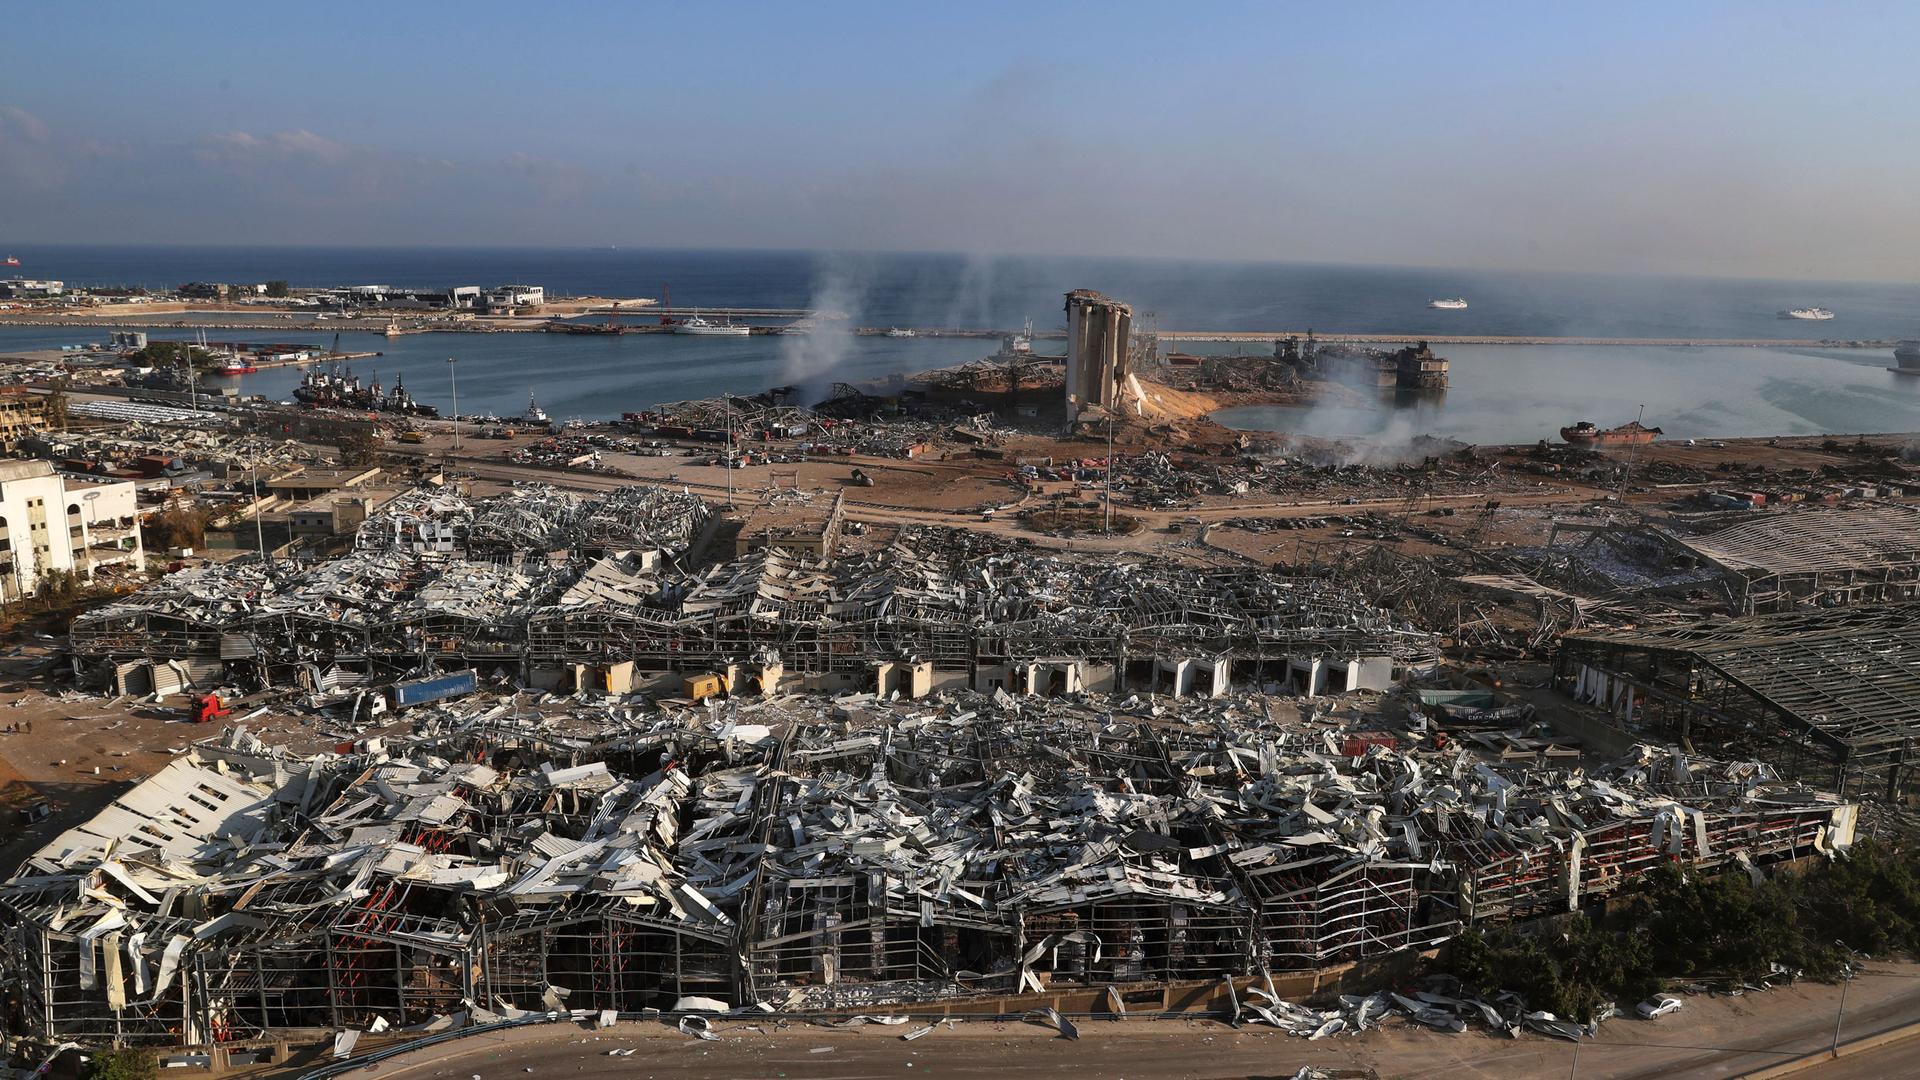 A photo showing Beirut's port left in complete rubble with smoke rising from parts and the Mediterranean Sea in the distance.